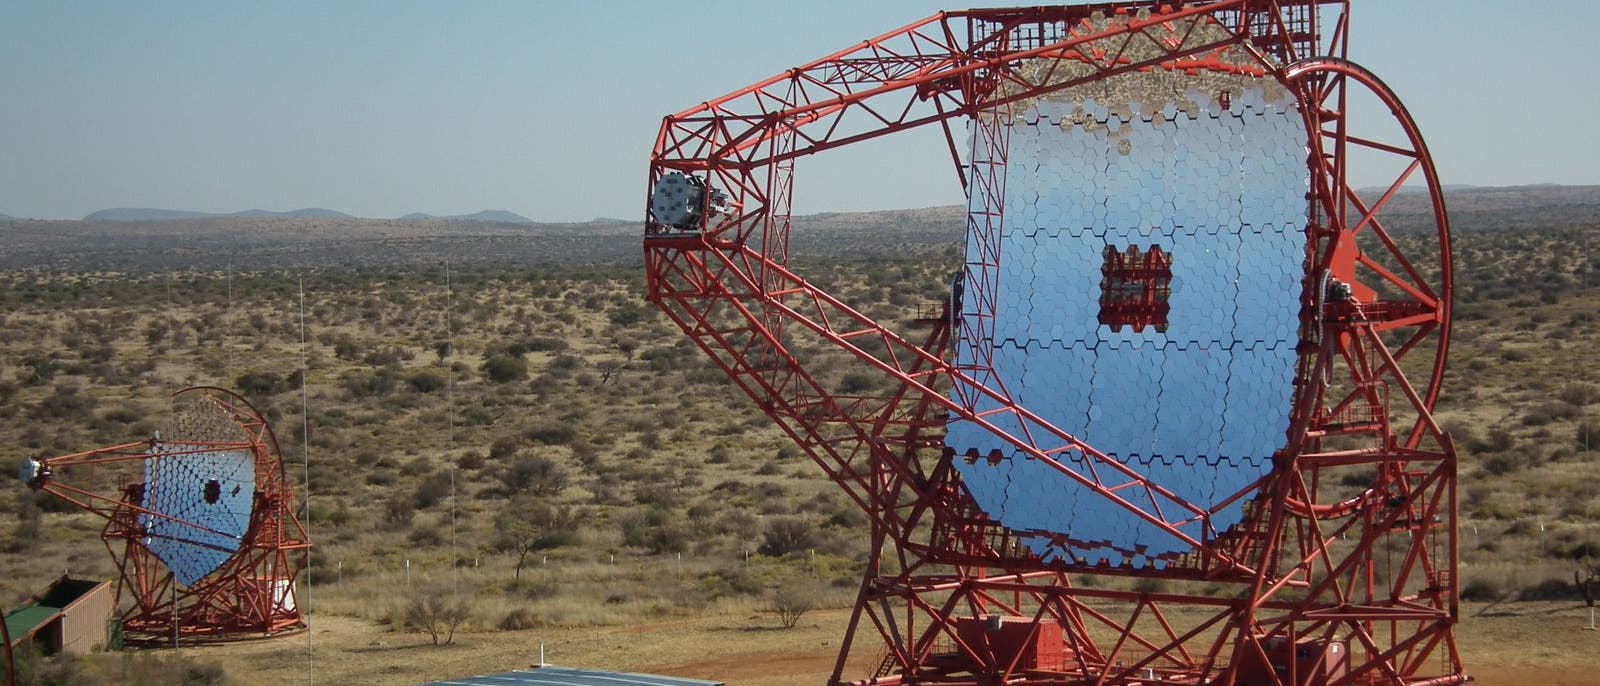 H.E.S.S.-Teleskop (High Energy Stereoscopic System) in Namibia